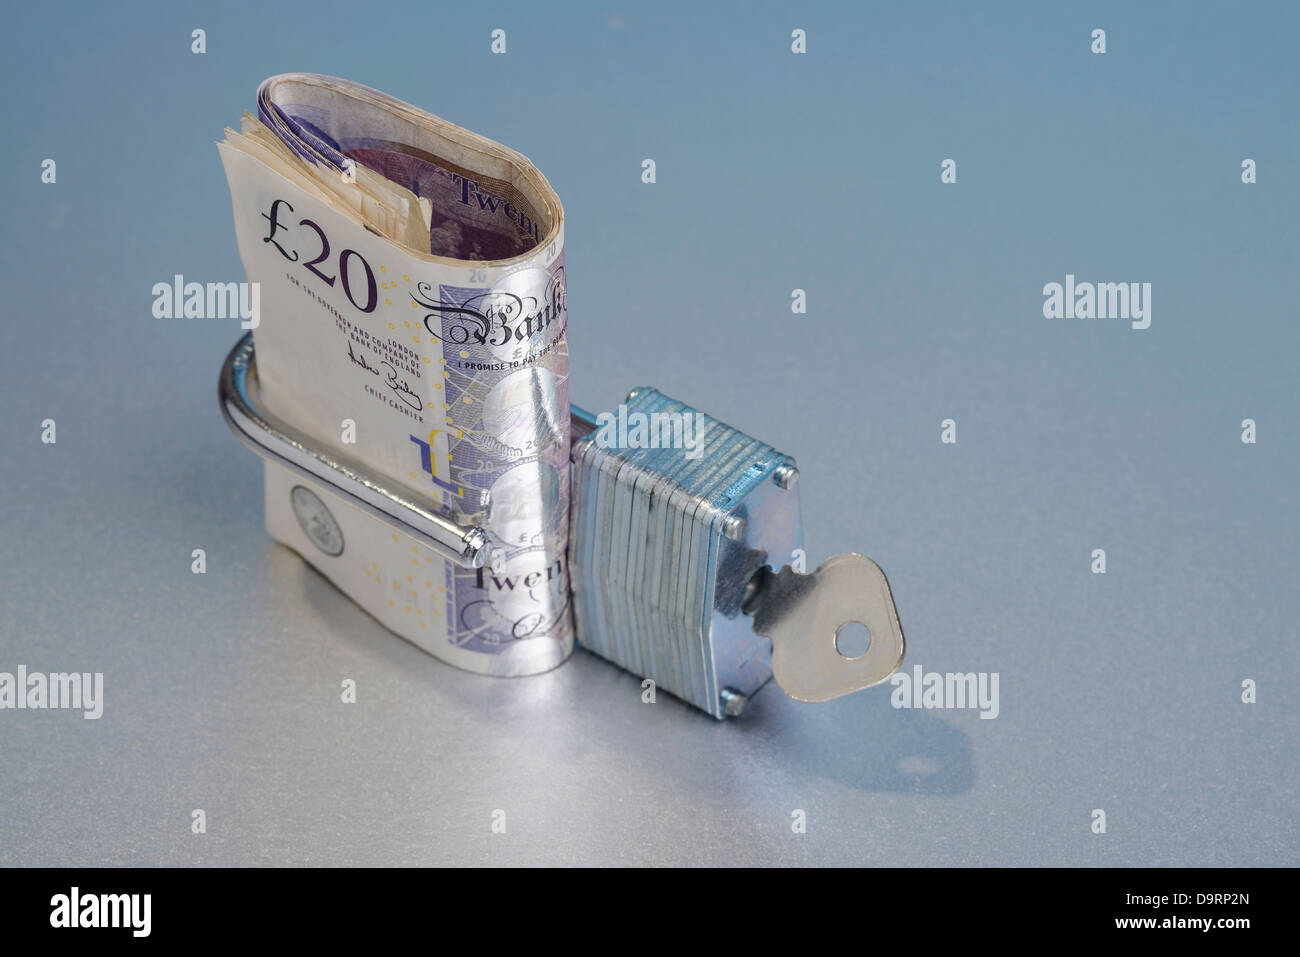 UK sterling £20 notes in an open padlock Stock Photo